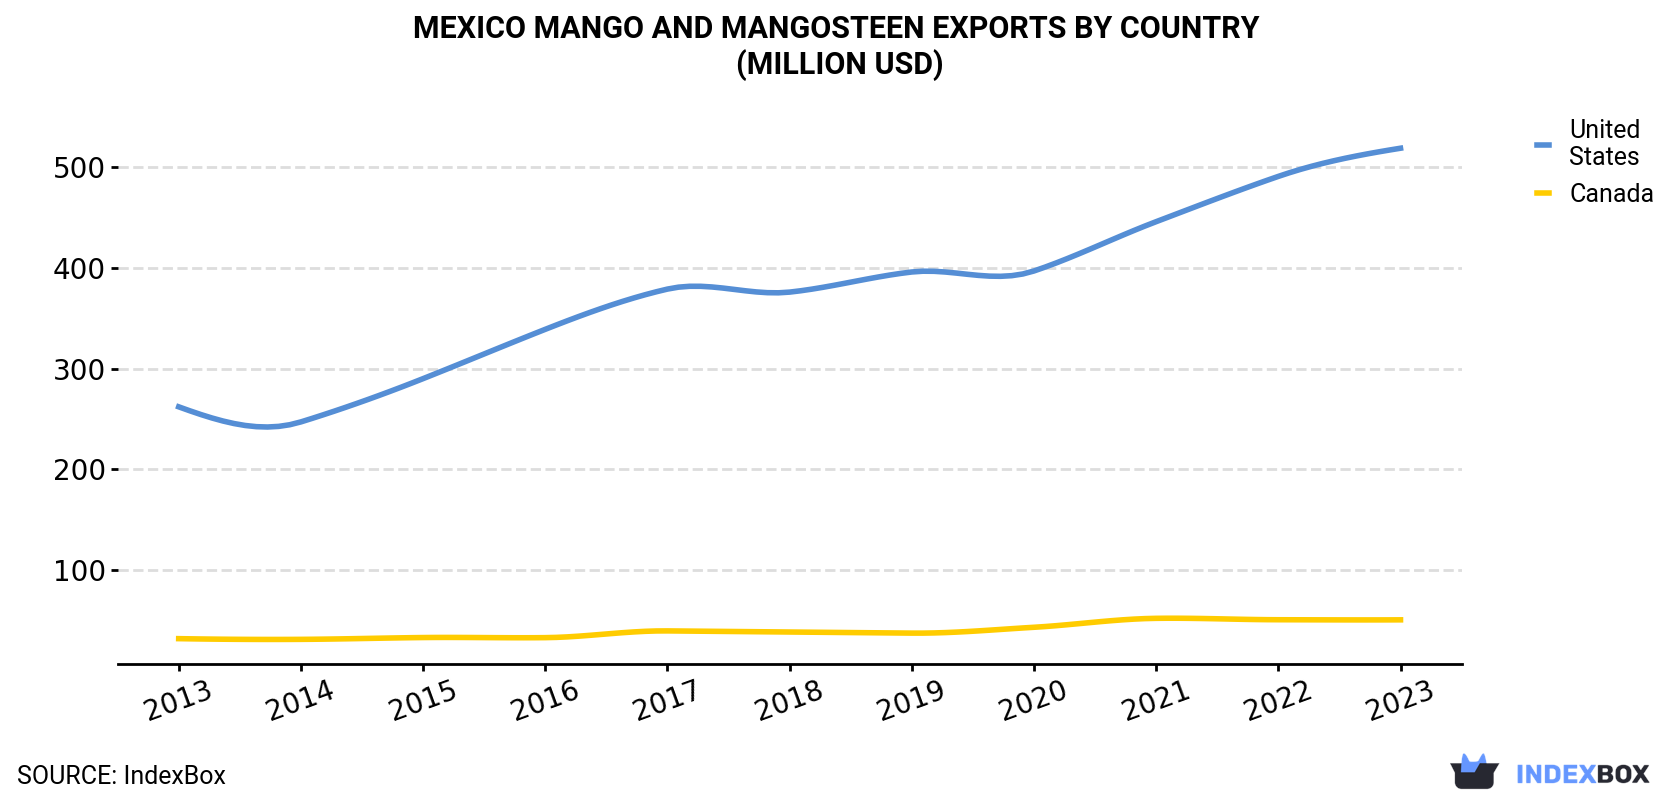 Mexico Mango And Mangosteen Exports By Country (Million USD)